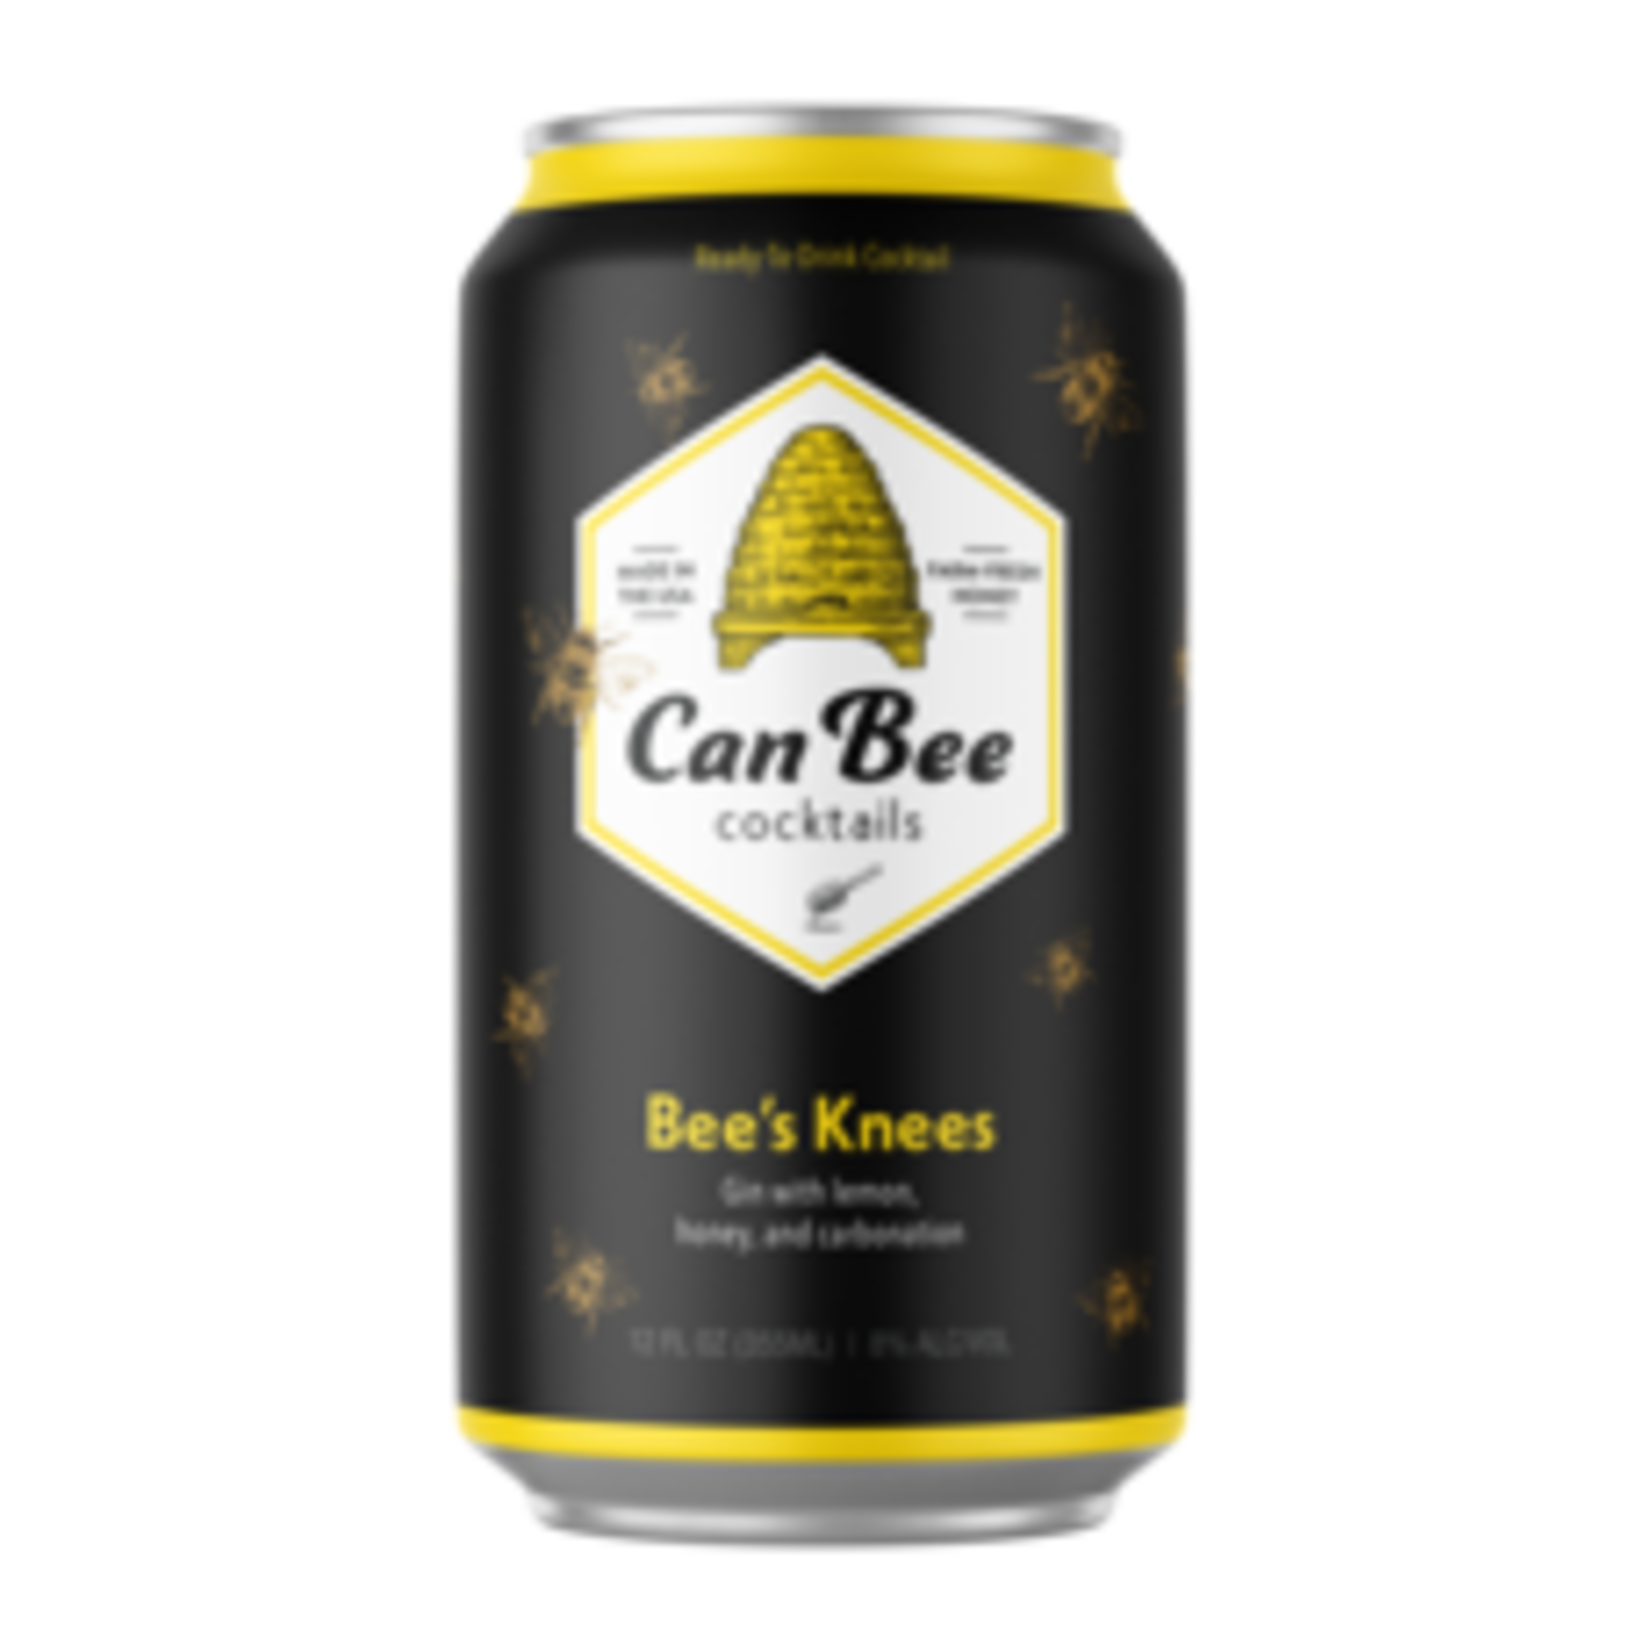 Black Button, "Can Bee" Bee's Knees (375ml Can)